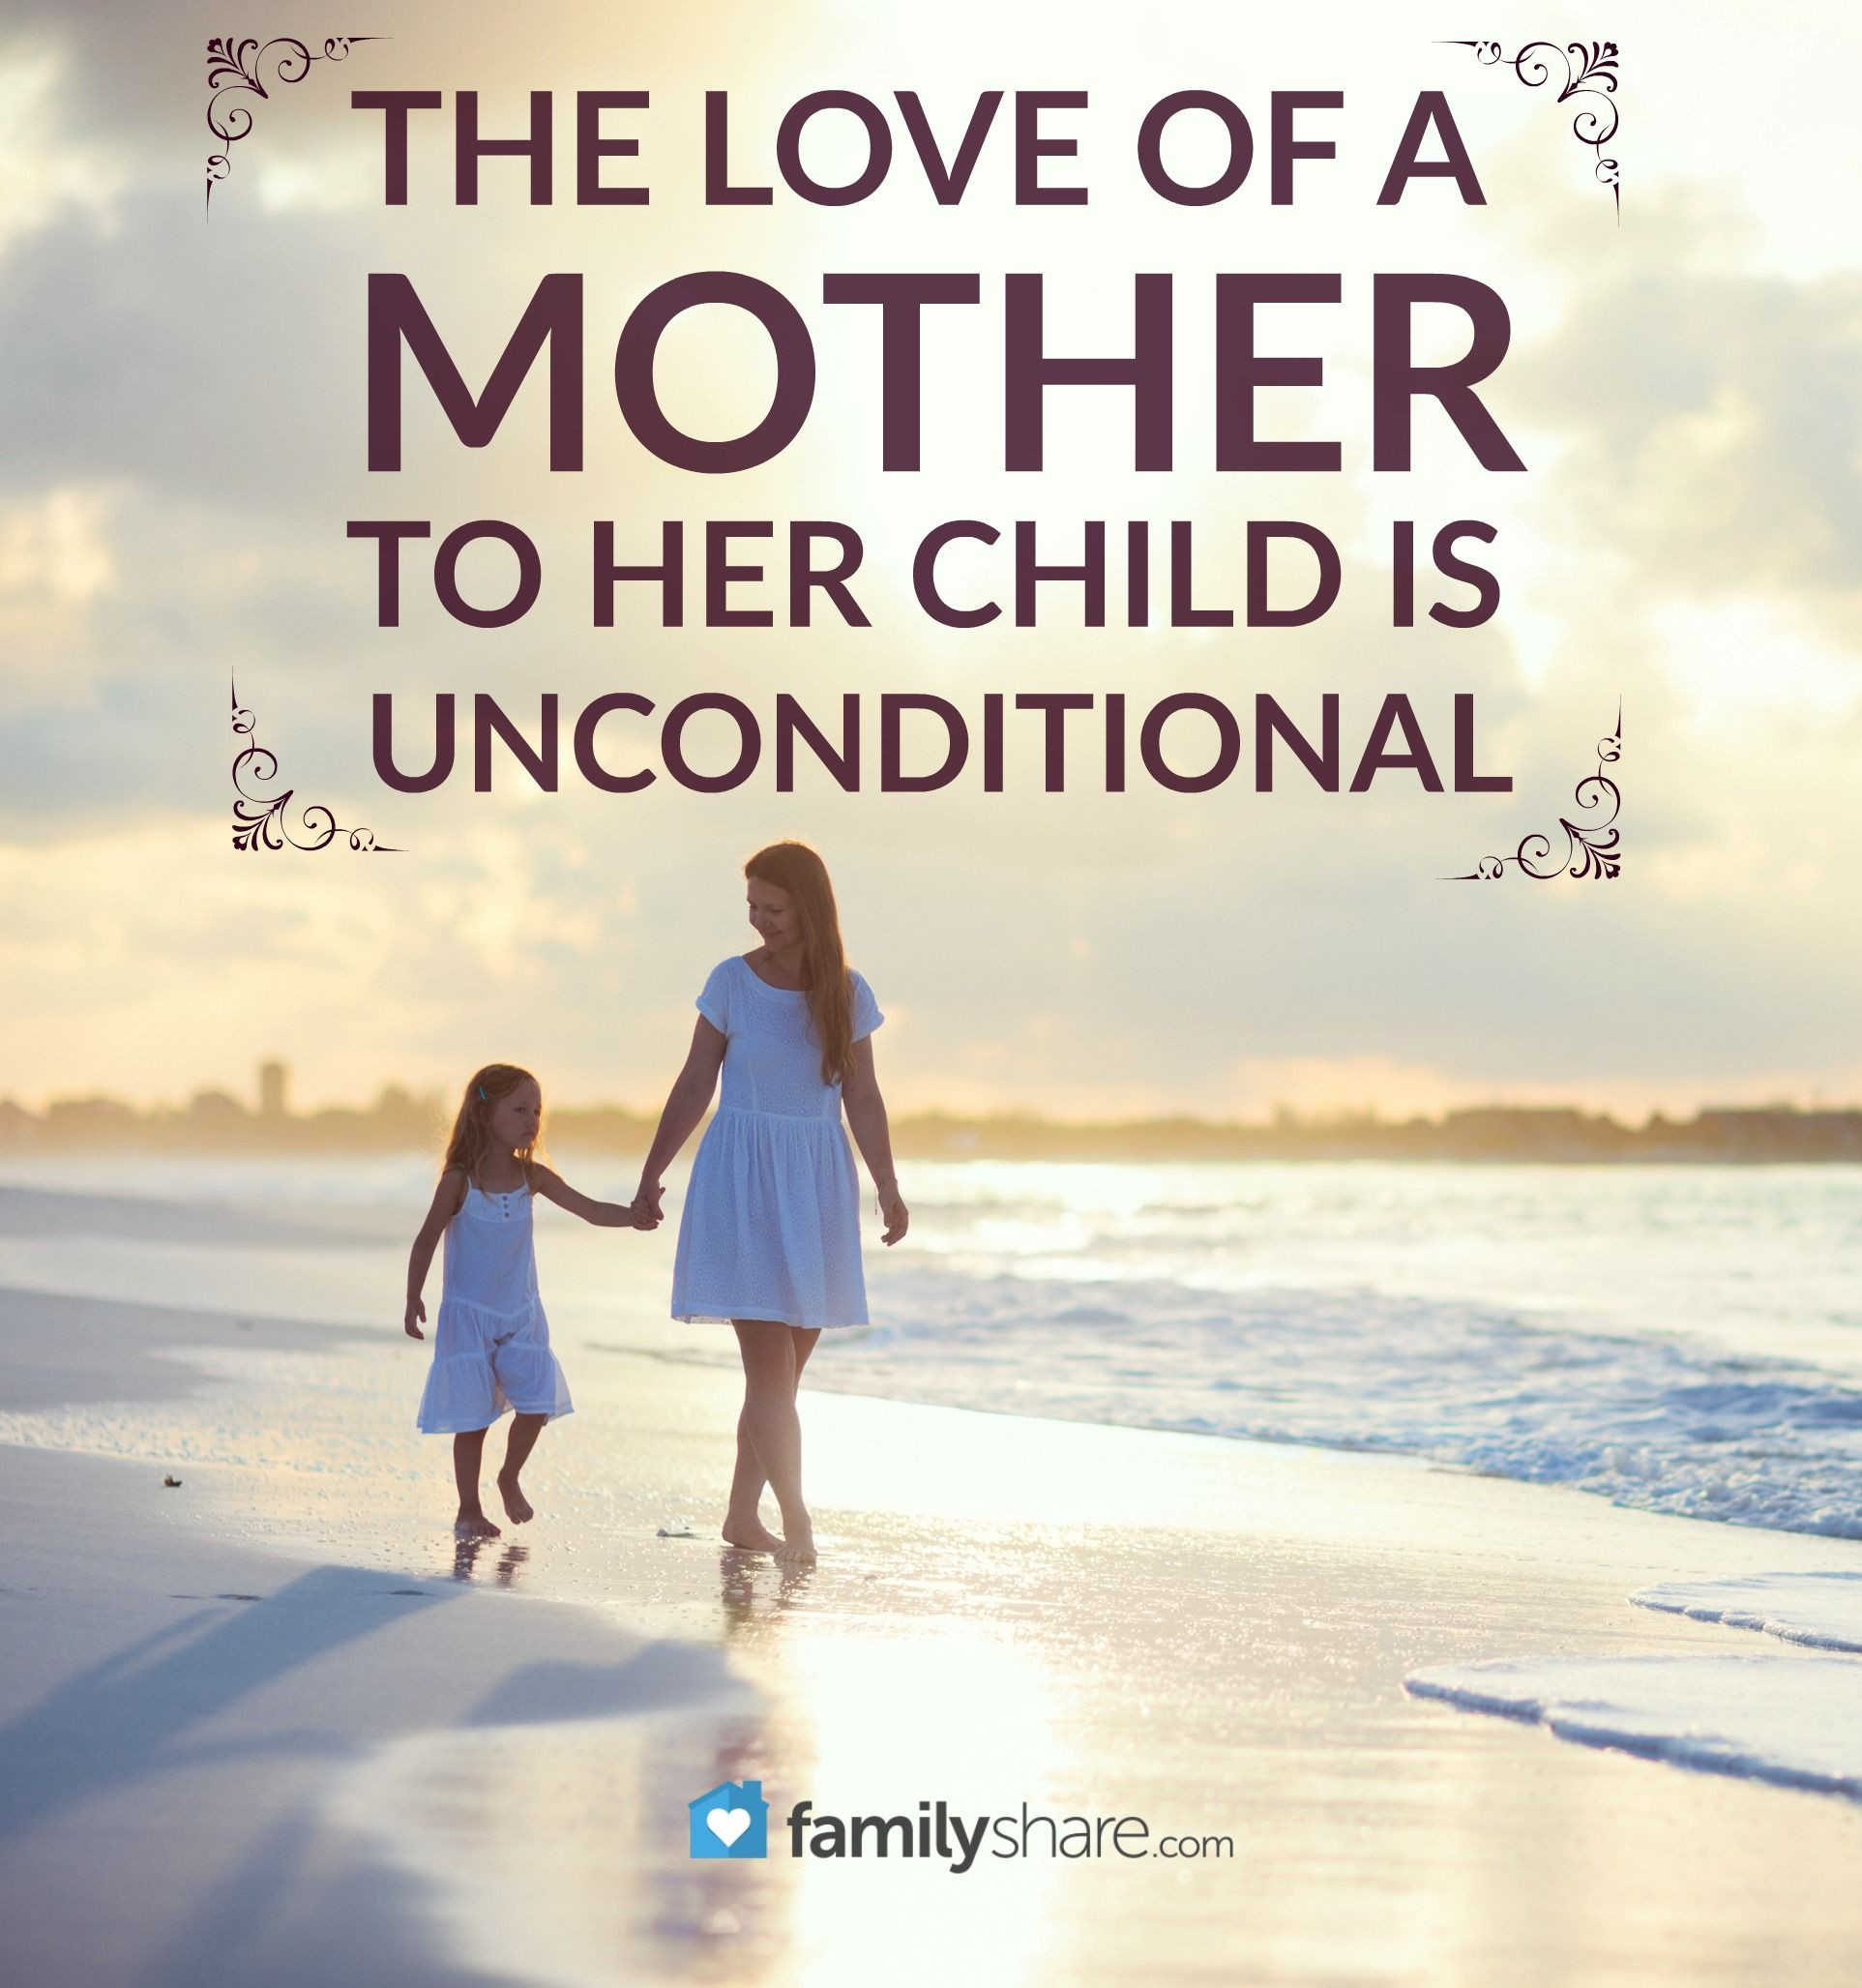 Quotes About Mothers Love For Her Child
 The love of a mother to her child is unconditional